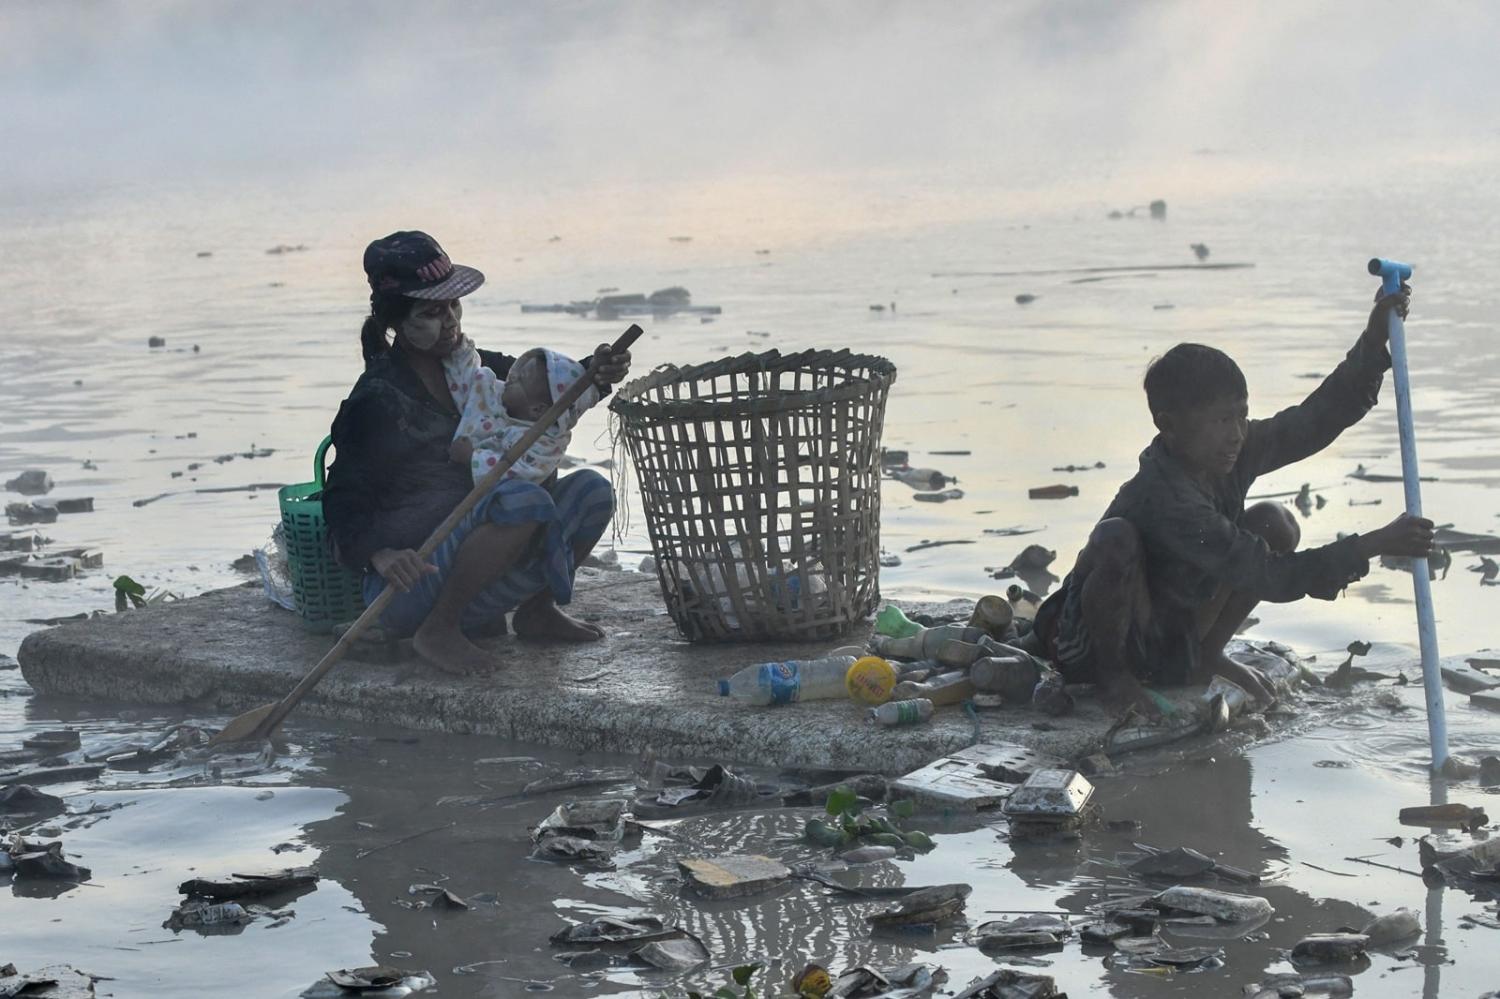 Myanmar waste collectors paddle a polystyrene boat in the murky waters of a Yangon creek after being driven to find work by a post-coup economic crisis, 14 January 2023 (Sai Aung Main/AFP via Getty Images)